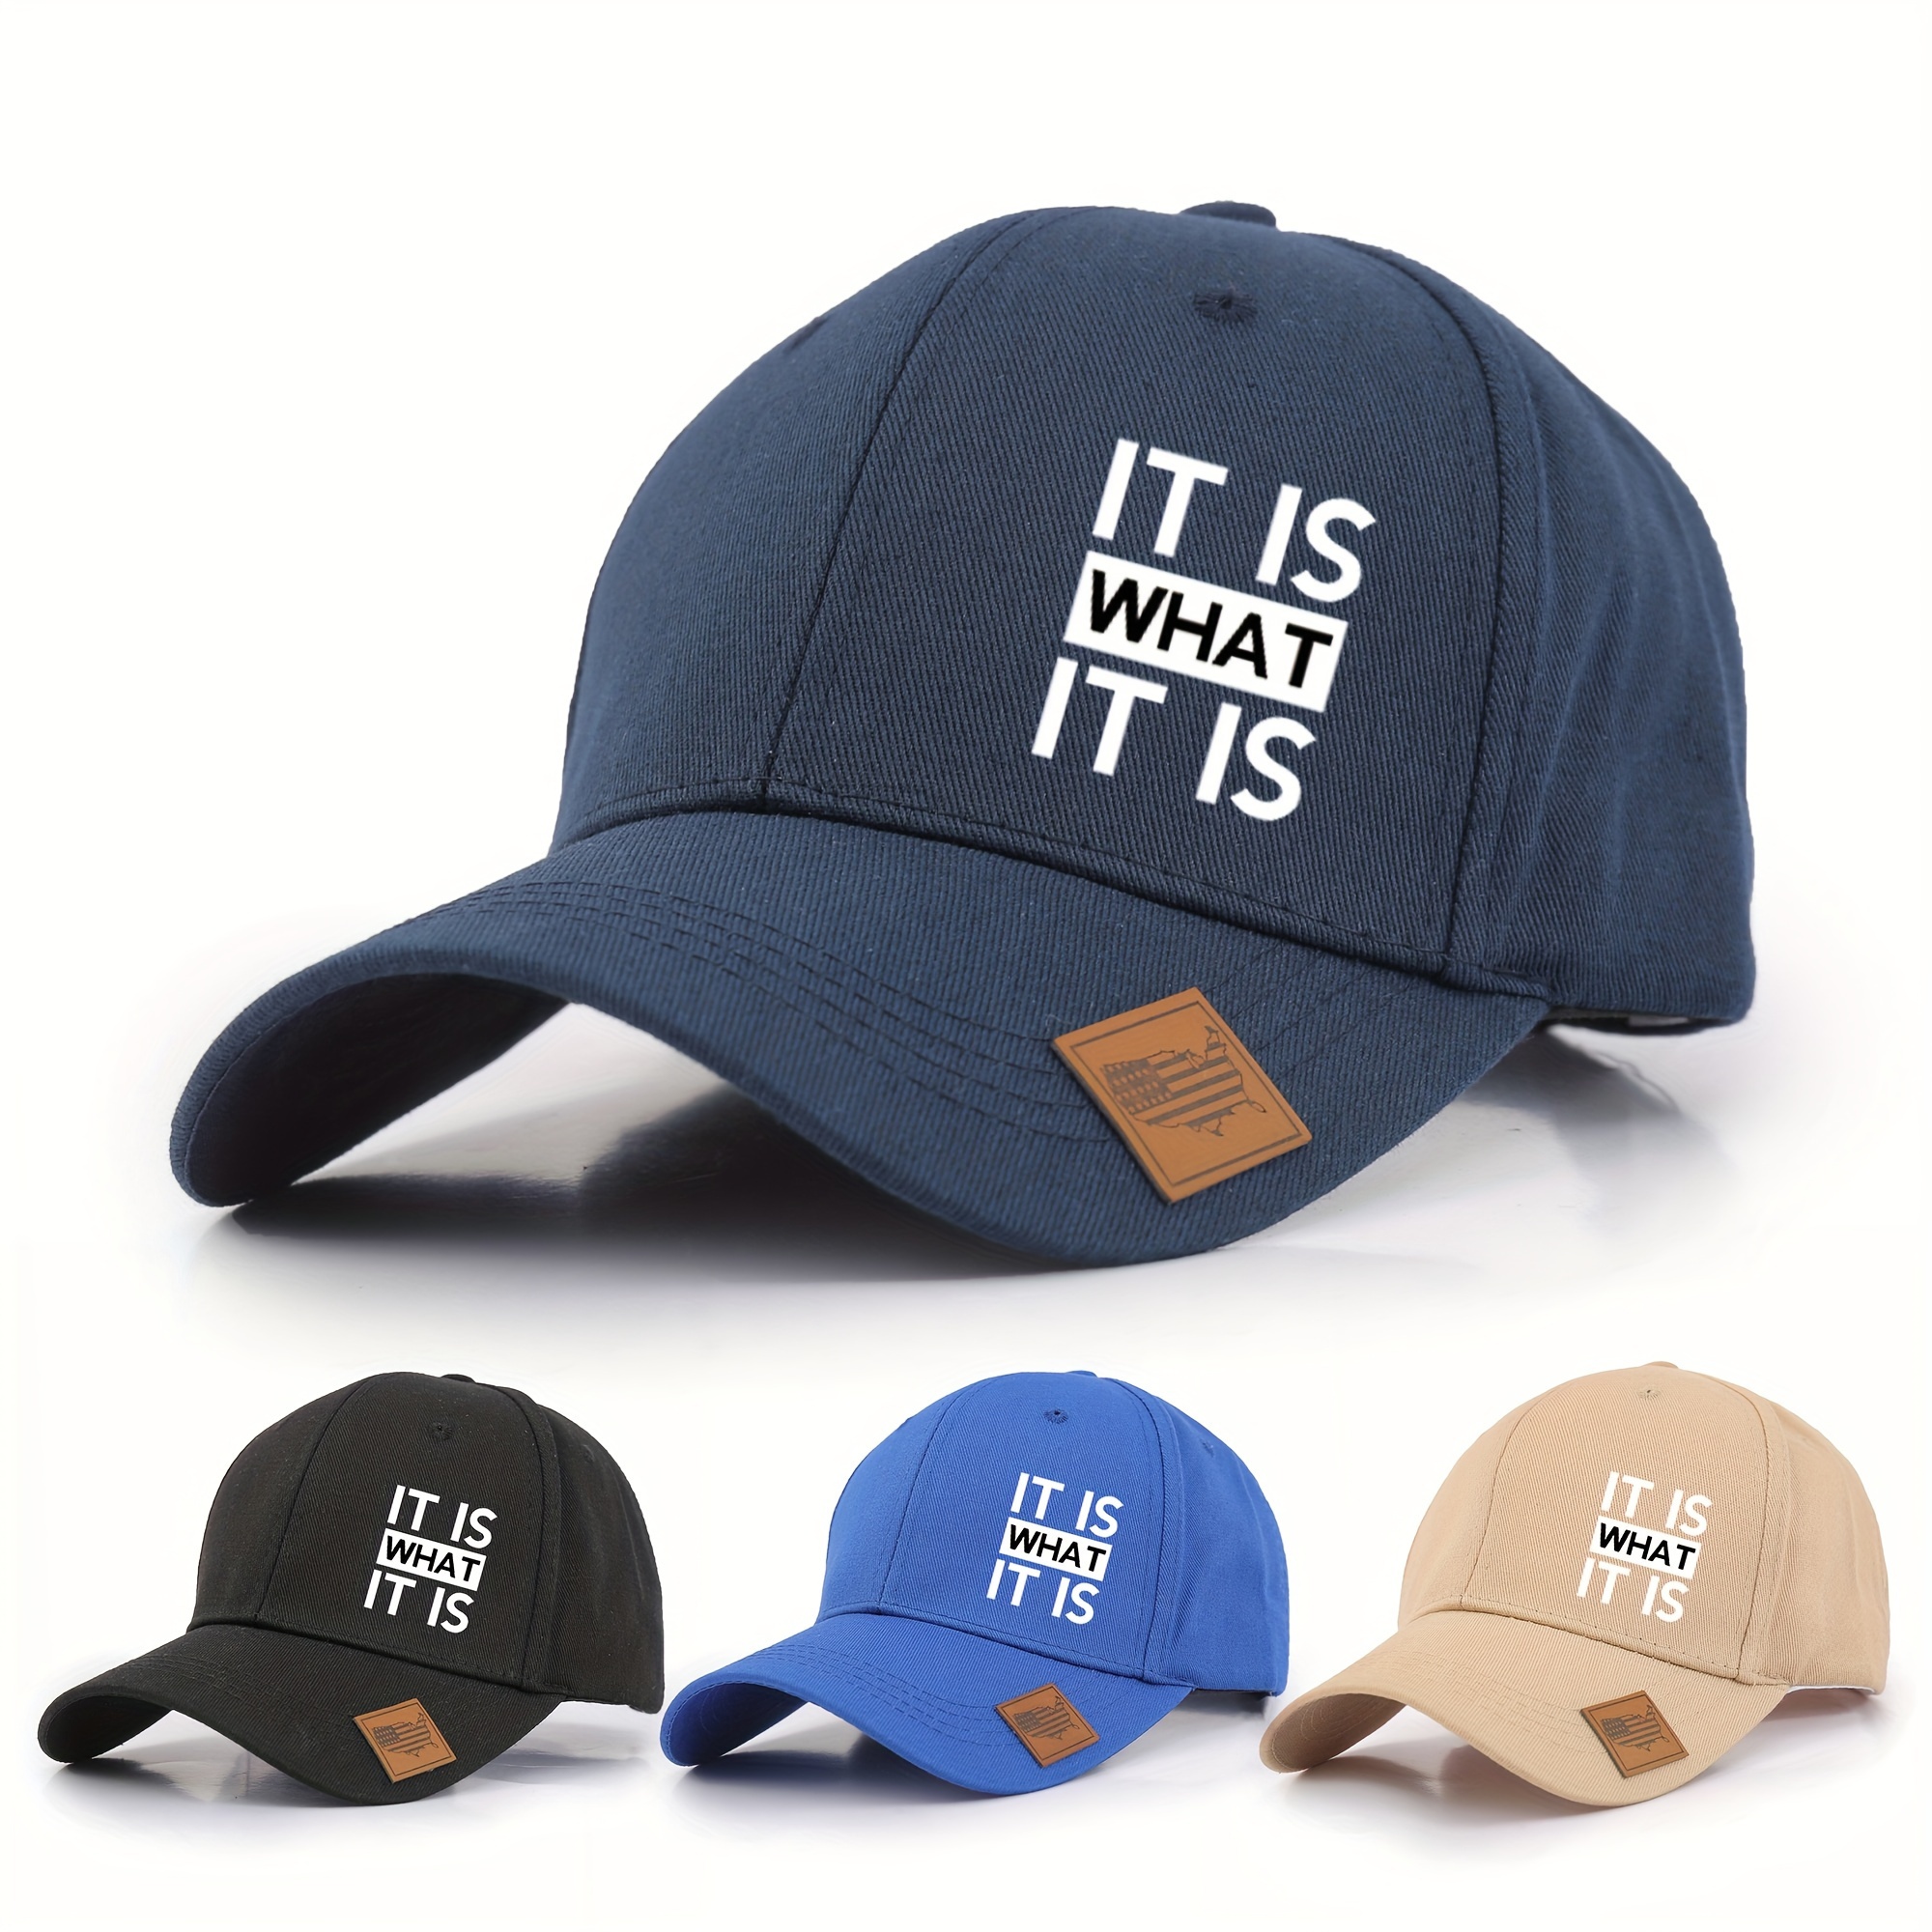 

It Is What It Is" Men's Cotton Baseball Cap - Casual Outdoor Sun Hat With Letter Print, Lightweight & Stretch Fabric Embroidered Baseball Cap Foldable Sun Hat